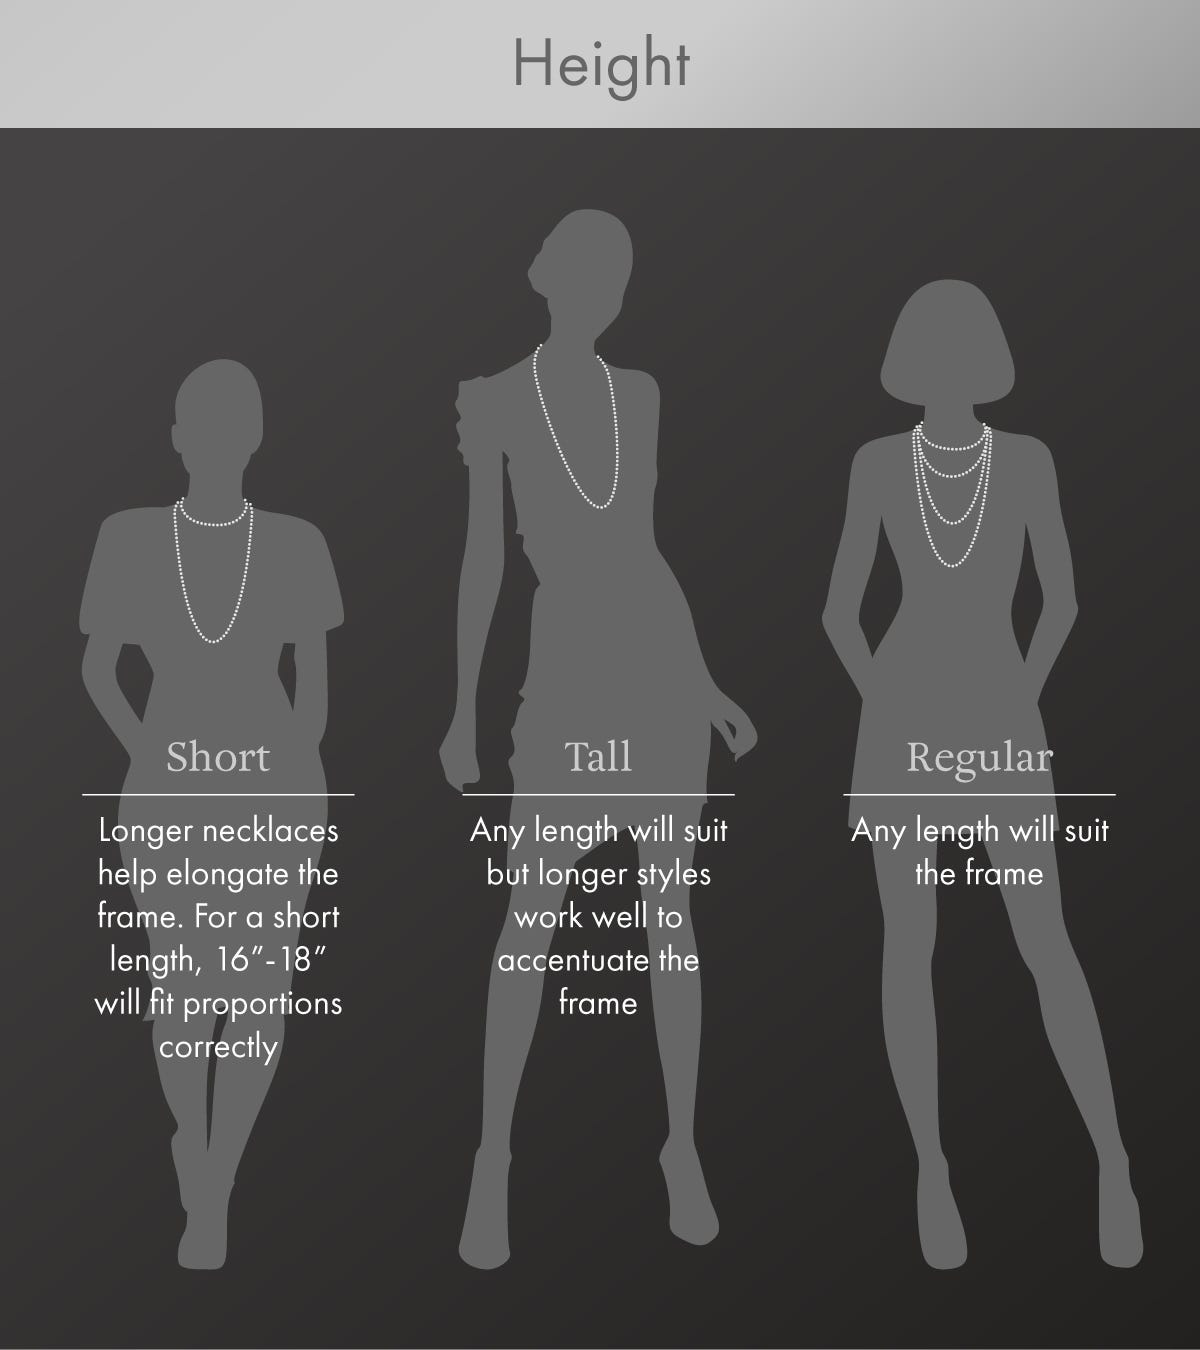 How to Choose the Best Necklace for Every Neckline - YOUR TRUE SELF BLOG